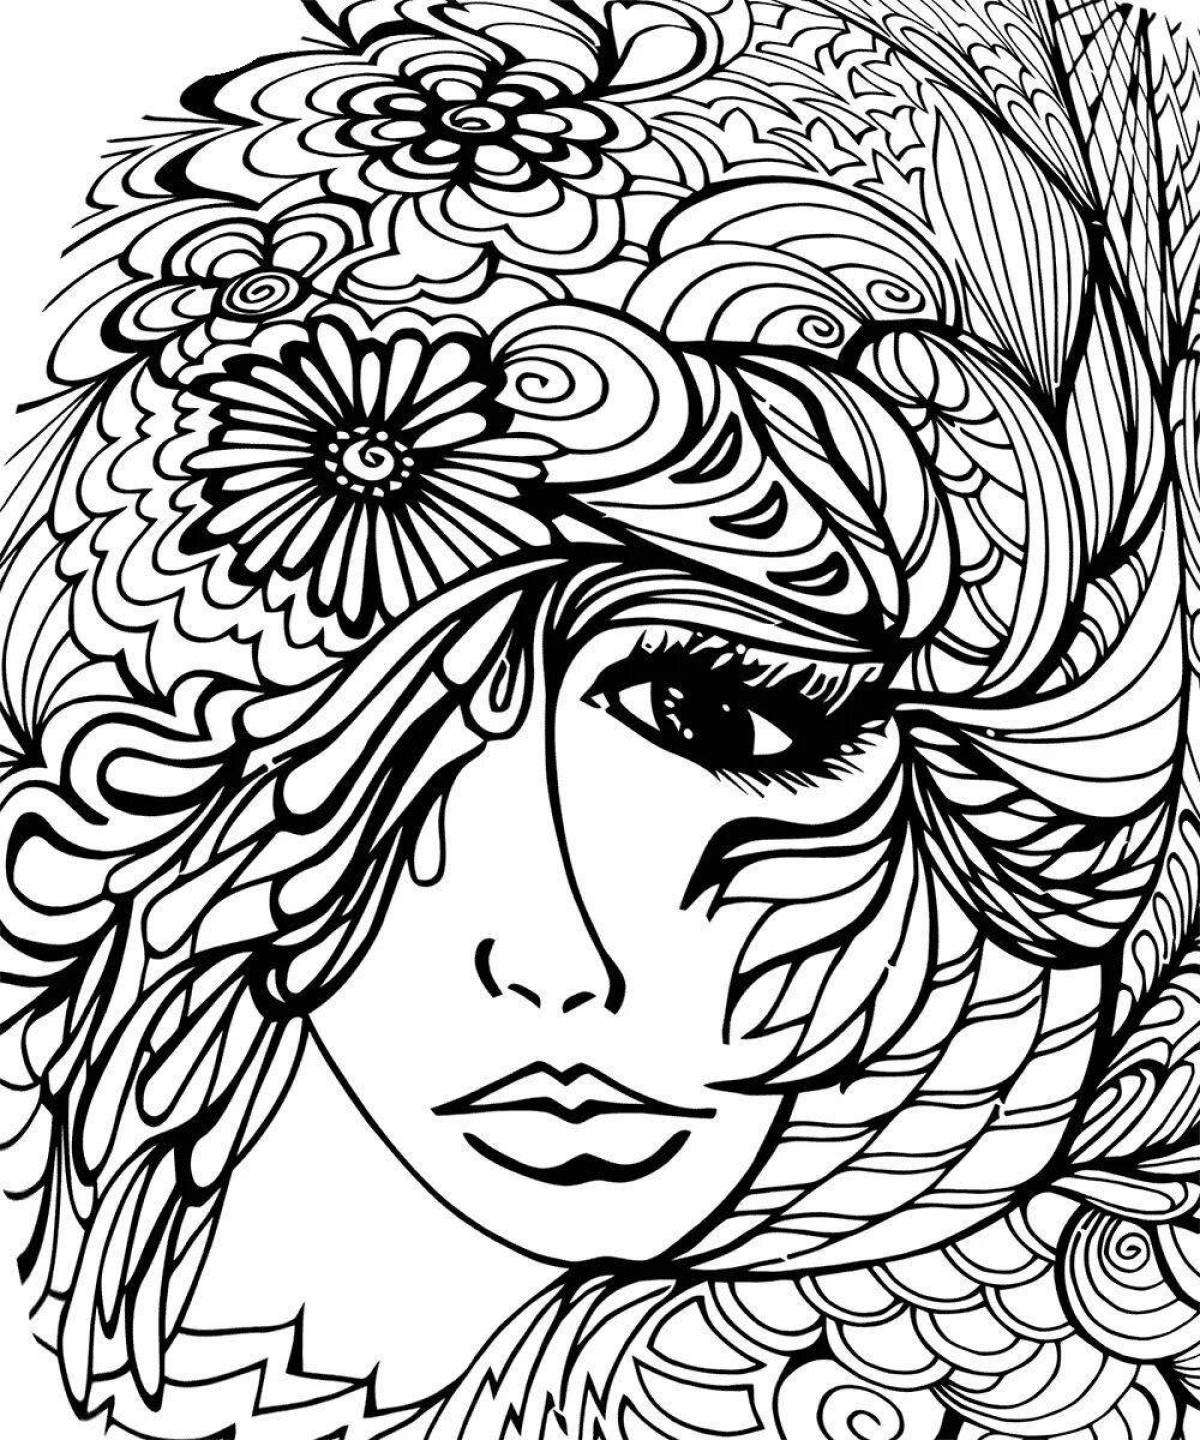 Delightful intricate coloring book for girls